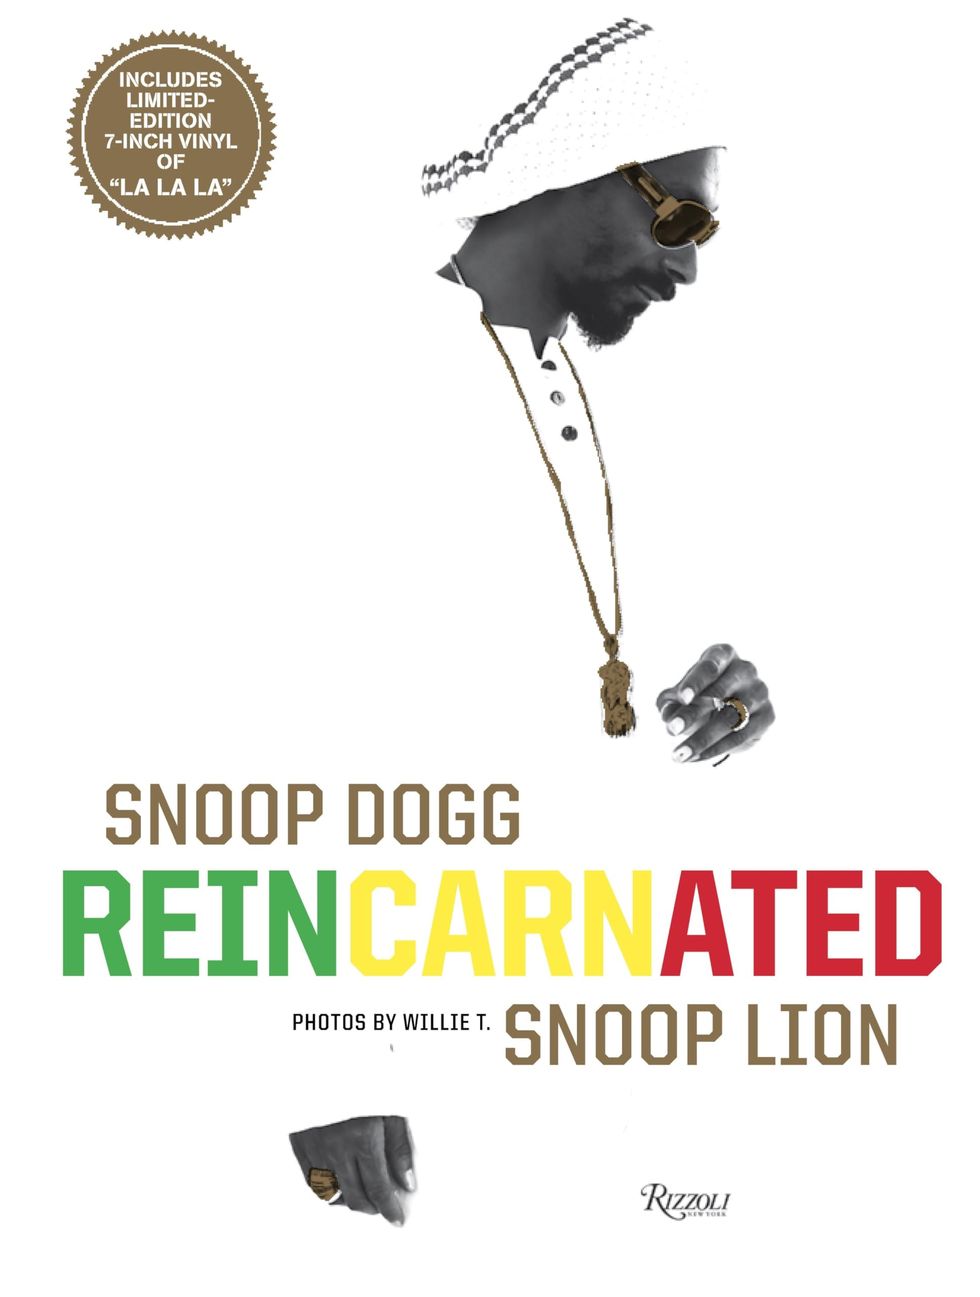 'Snoop Dogg: Reincarnated' by Snoop Dogg and Willie T.